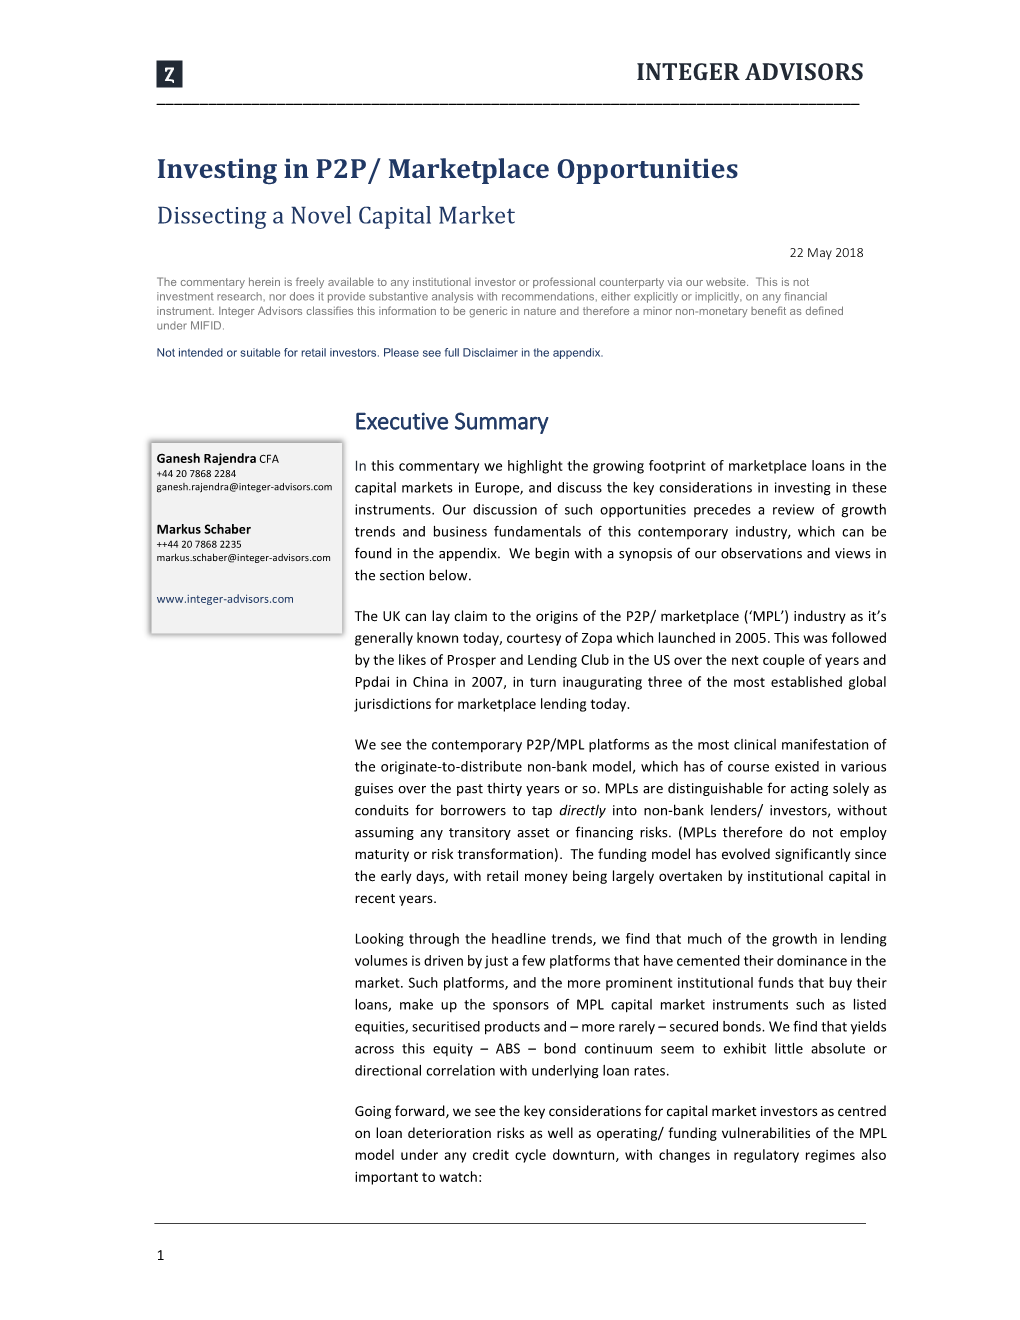 Investing in P2P/ Marketplace Opportunities Dissecting a Novel Capital Market